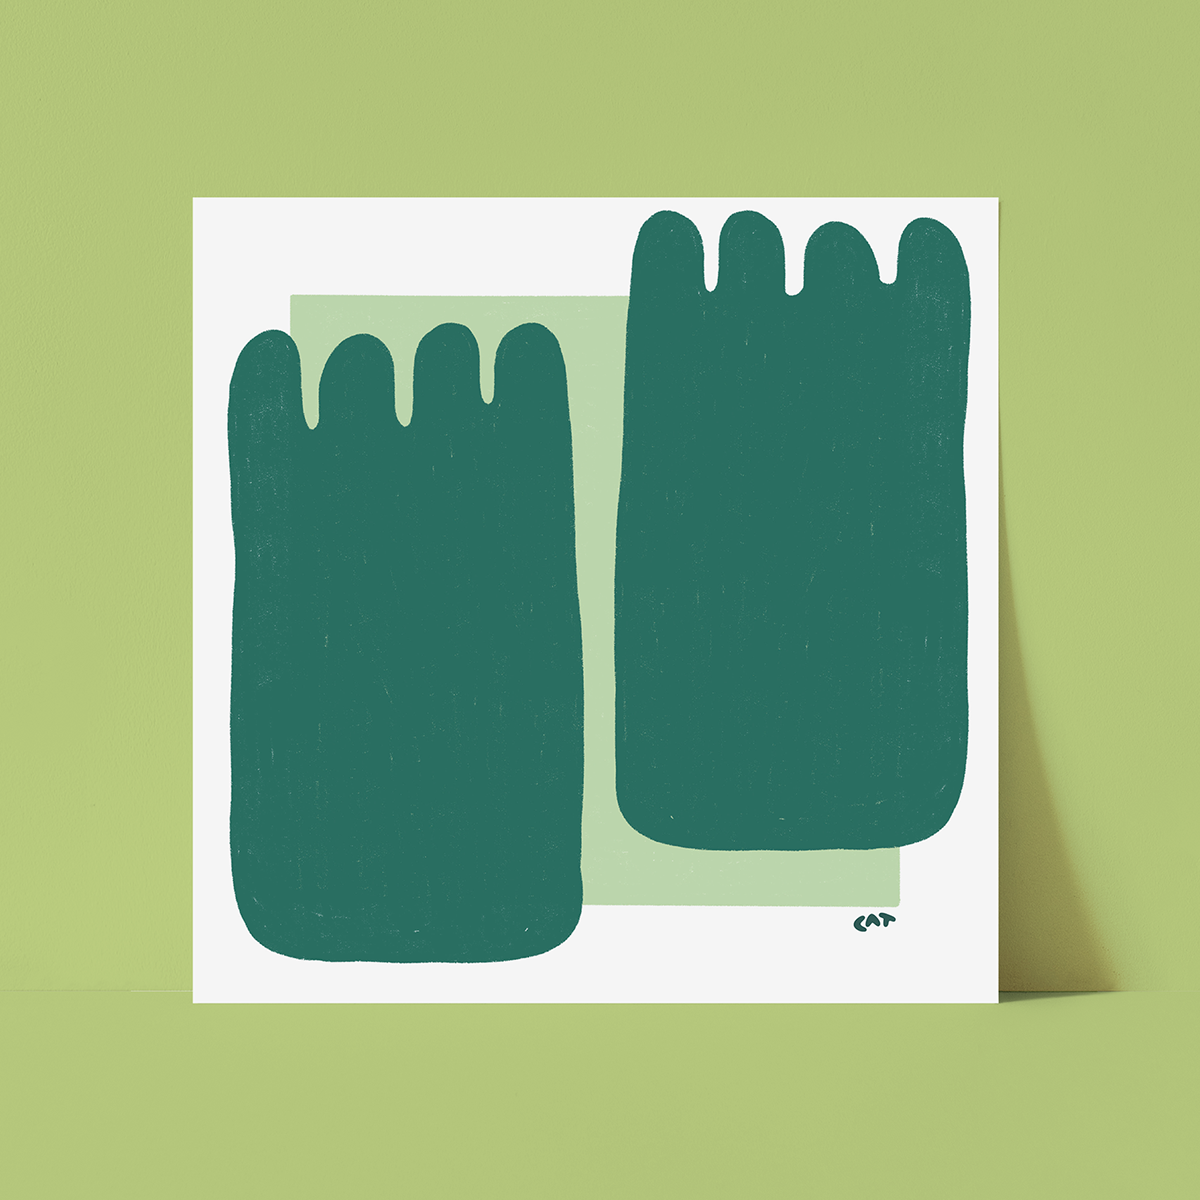 Unframed print of two squid like shapes on a mint green square.